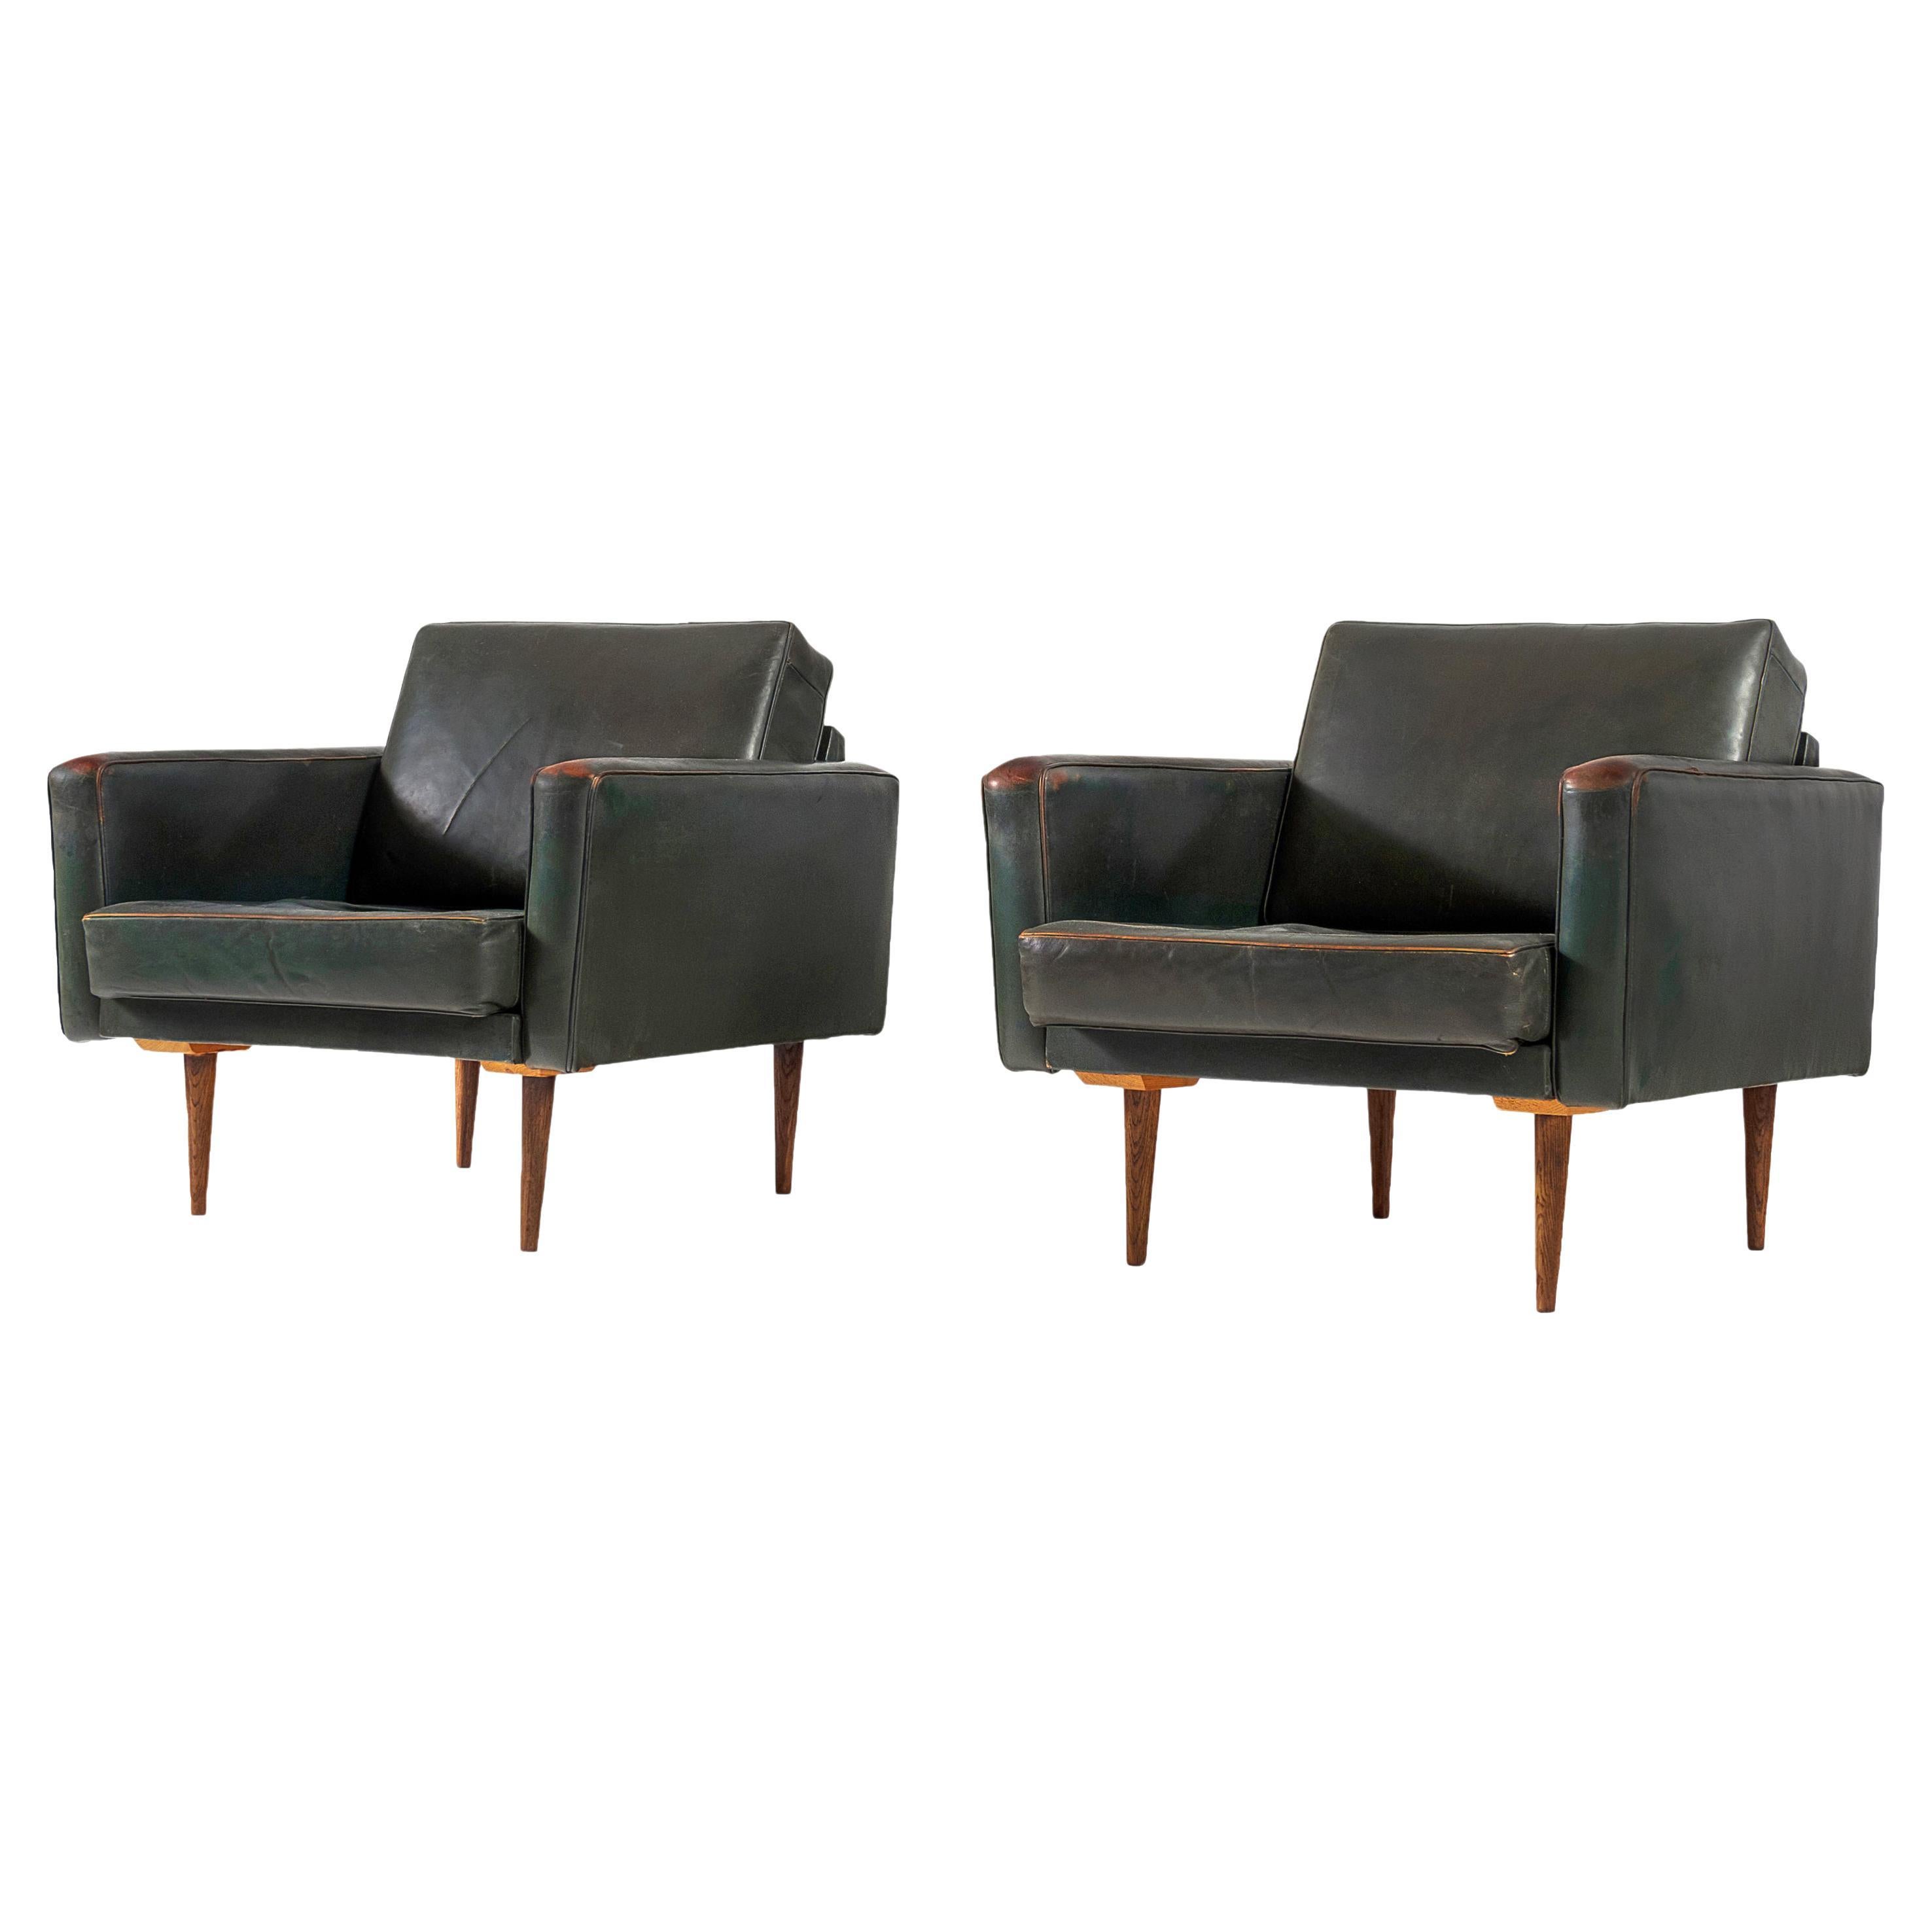 Pair of Lounge Chairs in Patinated Dark Green Leather